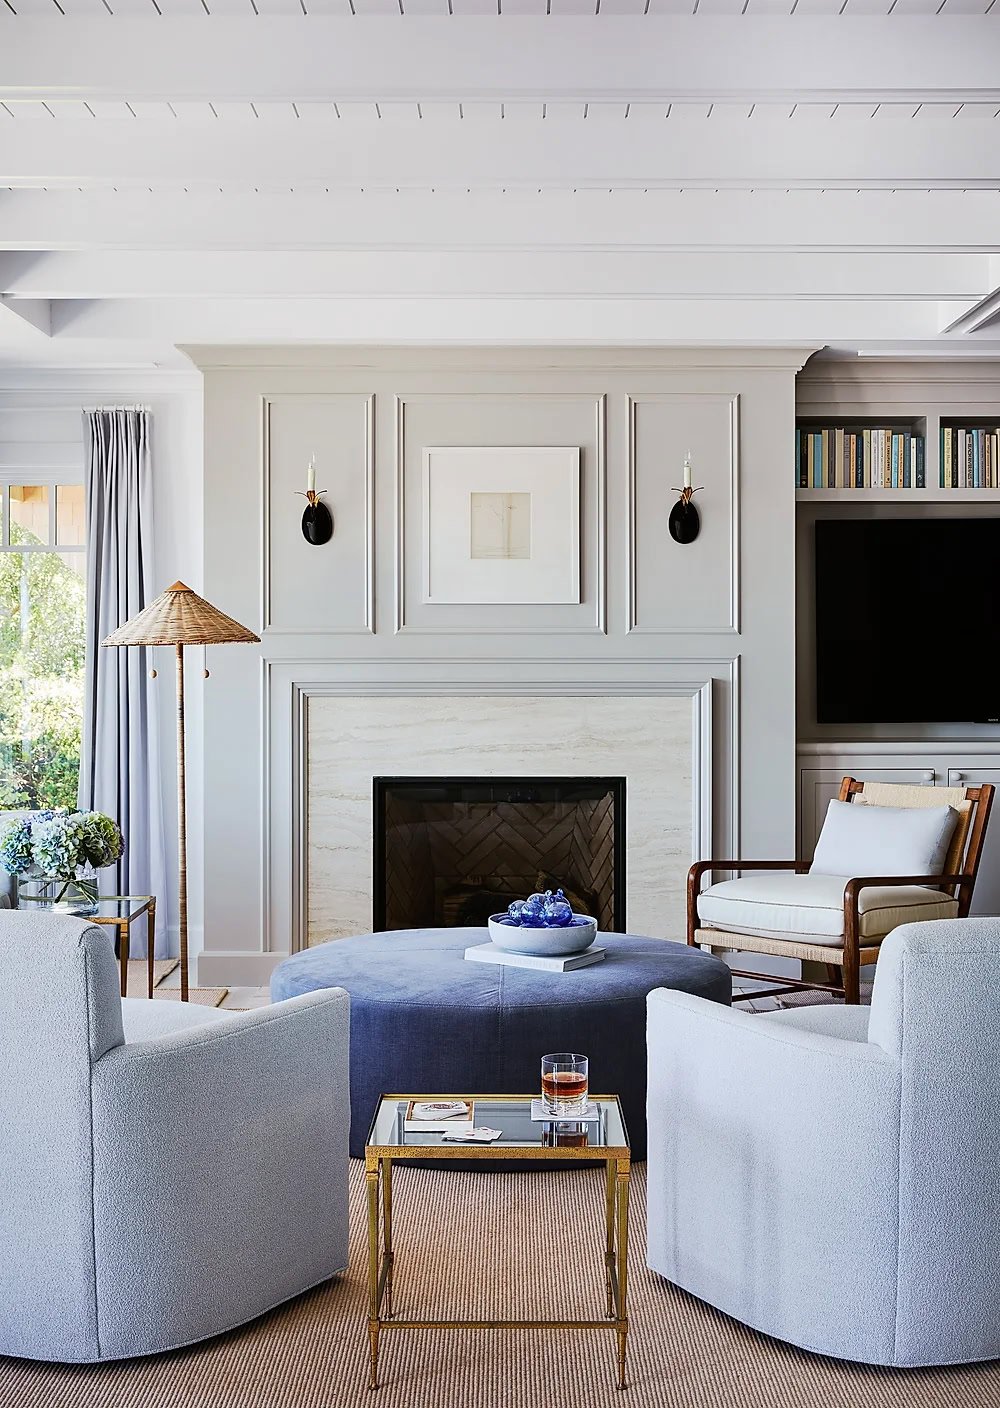 blue arm chairs and upholstered ottoman in front of a fireplace.